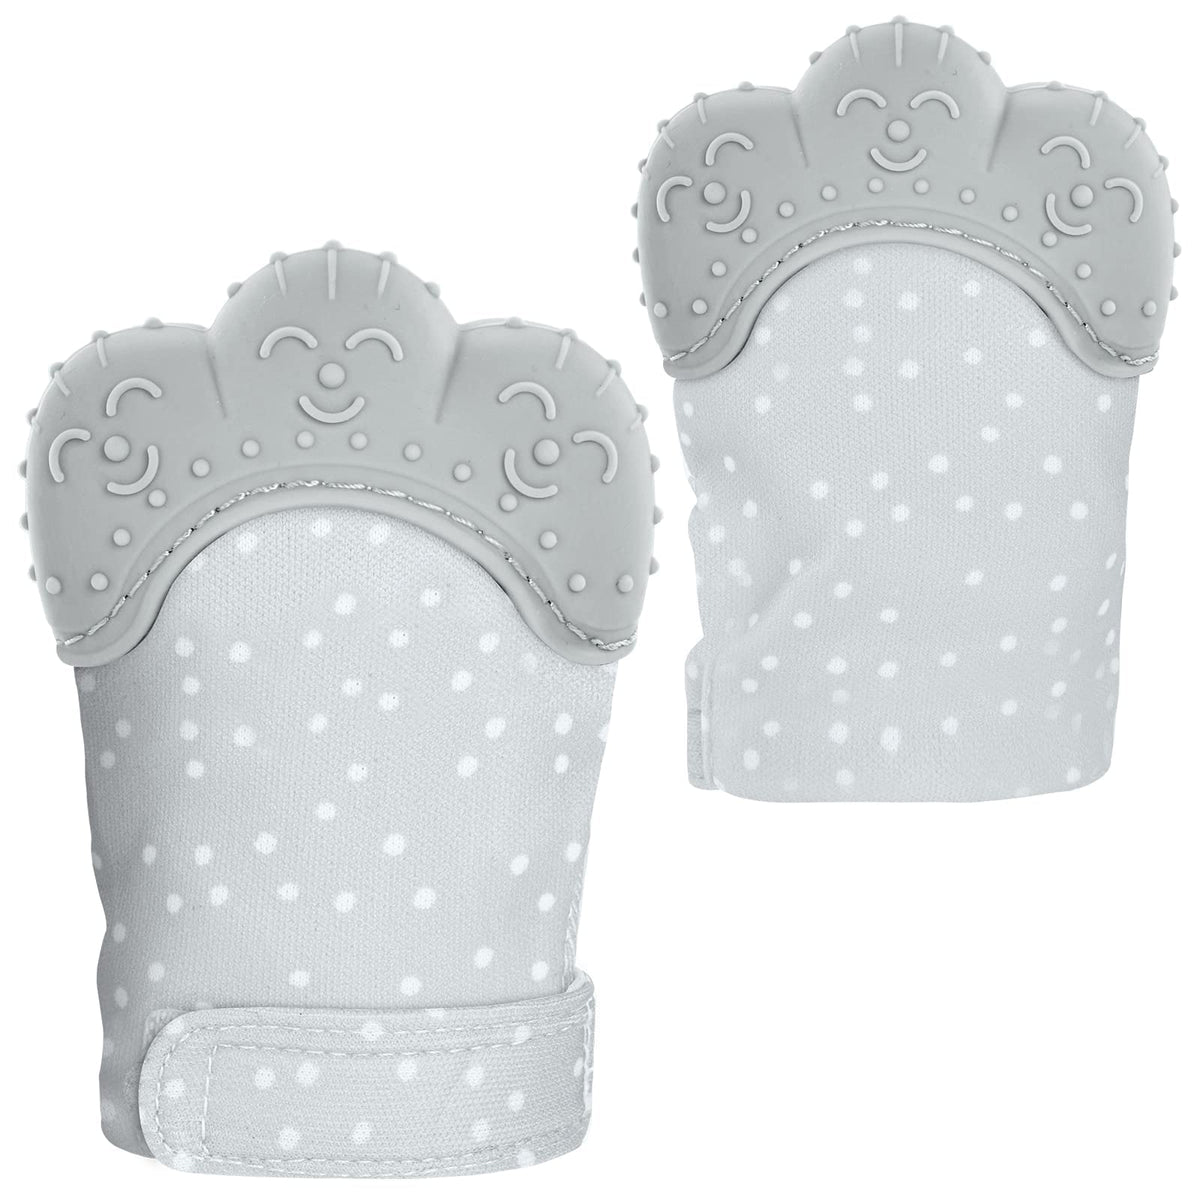 Vicloon Baby Teething Set, 2 Pack Teething Mittens for Baby, Includes 2 Silicone Mitten Teether Glove, Polka Dots Teething Glove, Infant Soothing Pain Relief Mitt Baby Teether Mits for Baby (Grey)